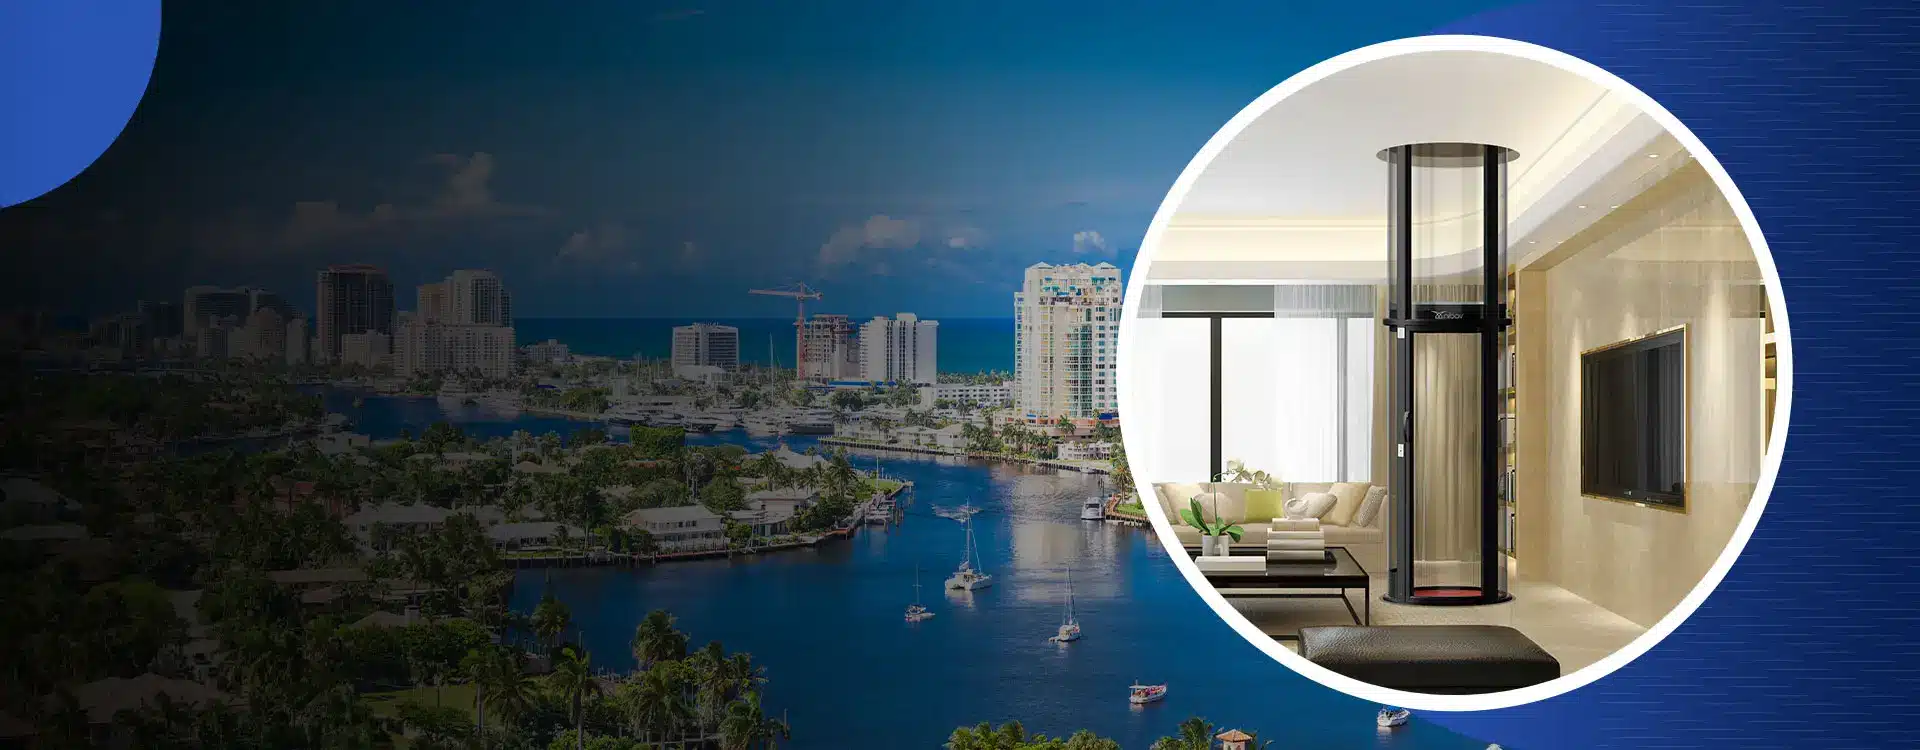 Domestic Lifts in Fort Lauderdale - Nibav Lifts USA